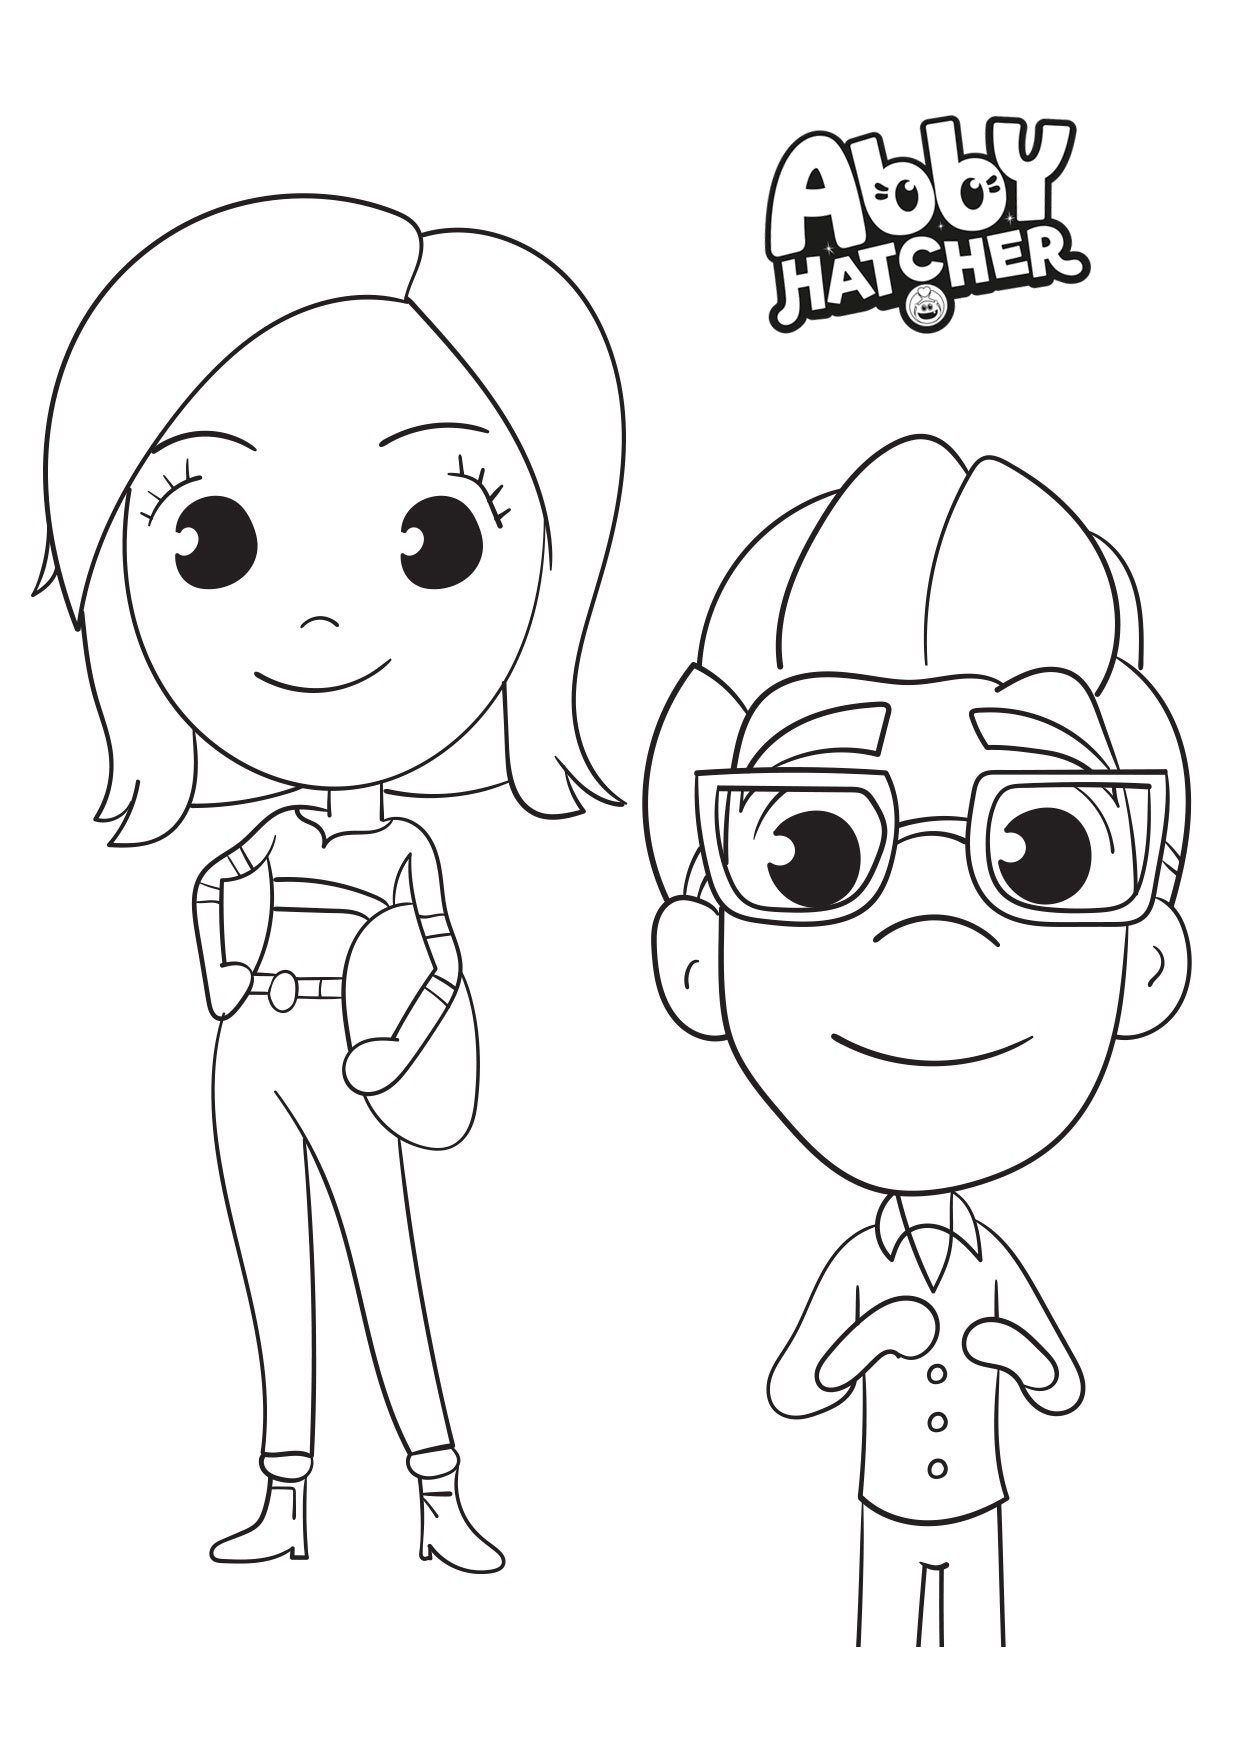 Abby Hatcher Coloring Pages Printable For Free Download 0534